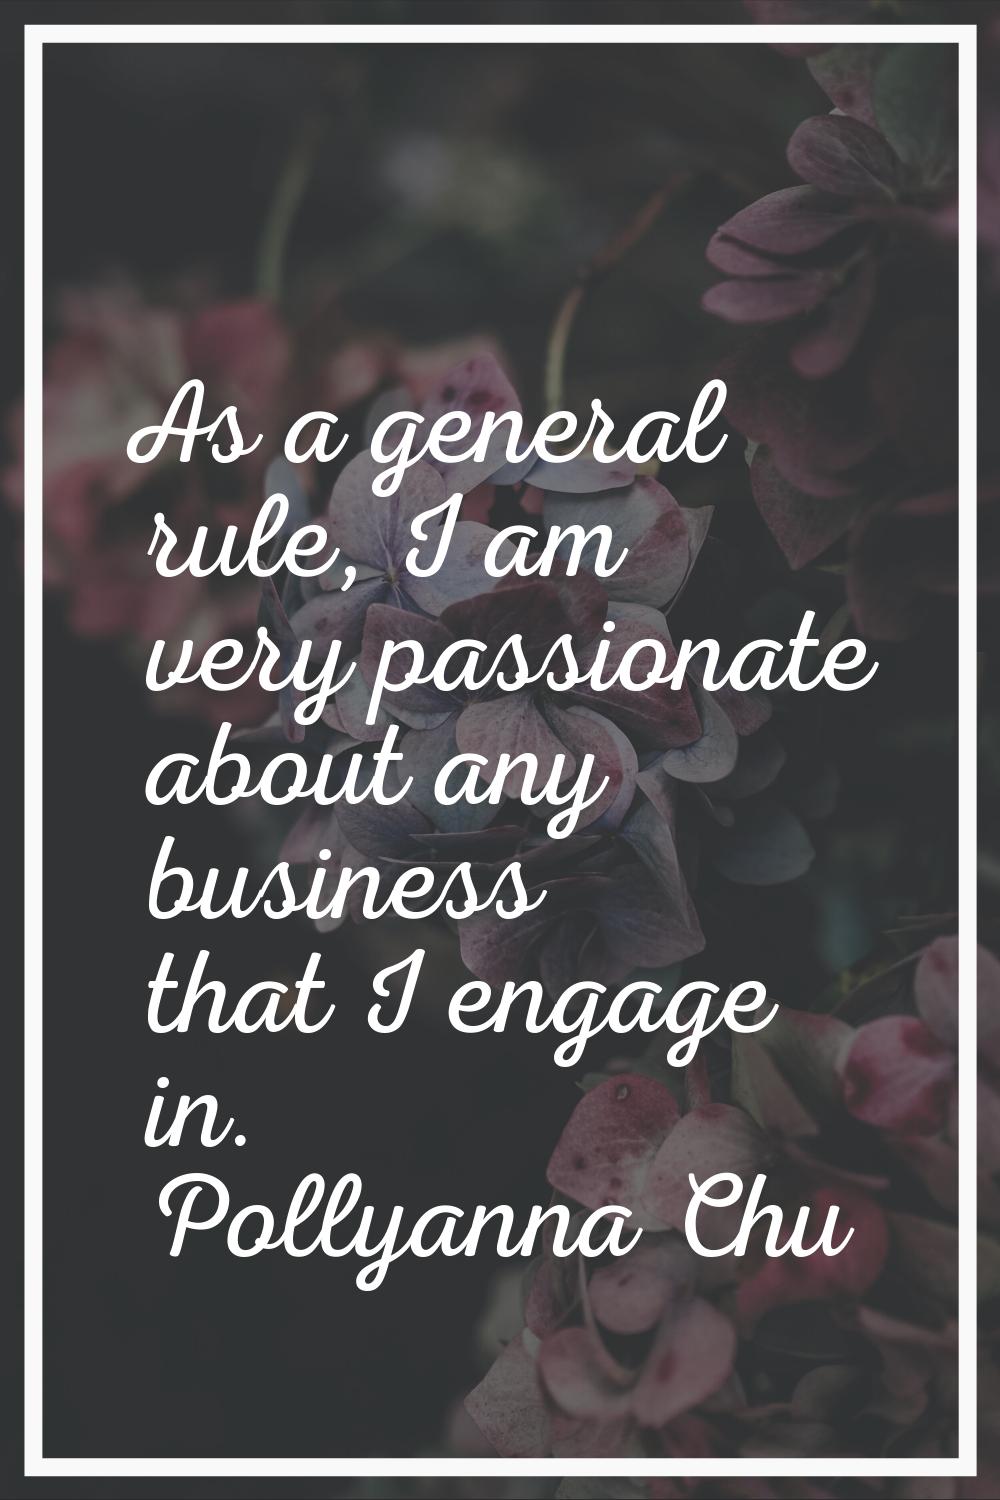 As a general rule, I am very passionate about any business that I engage in.